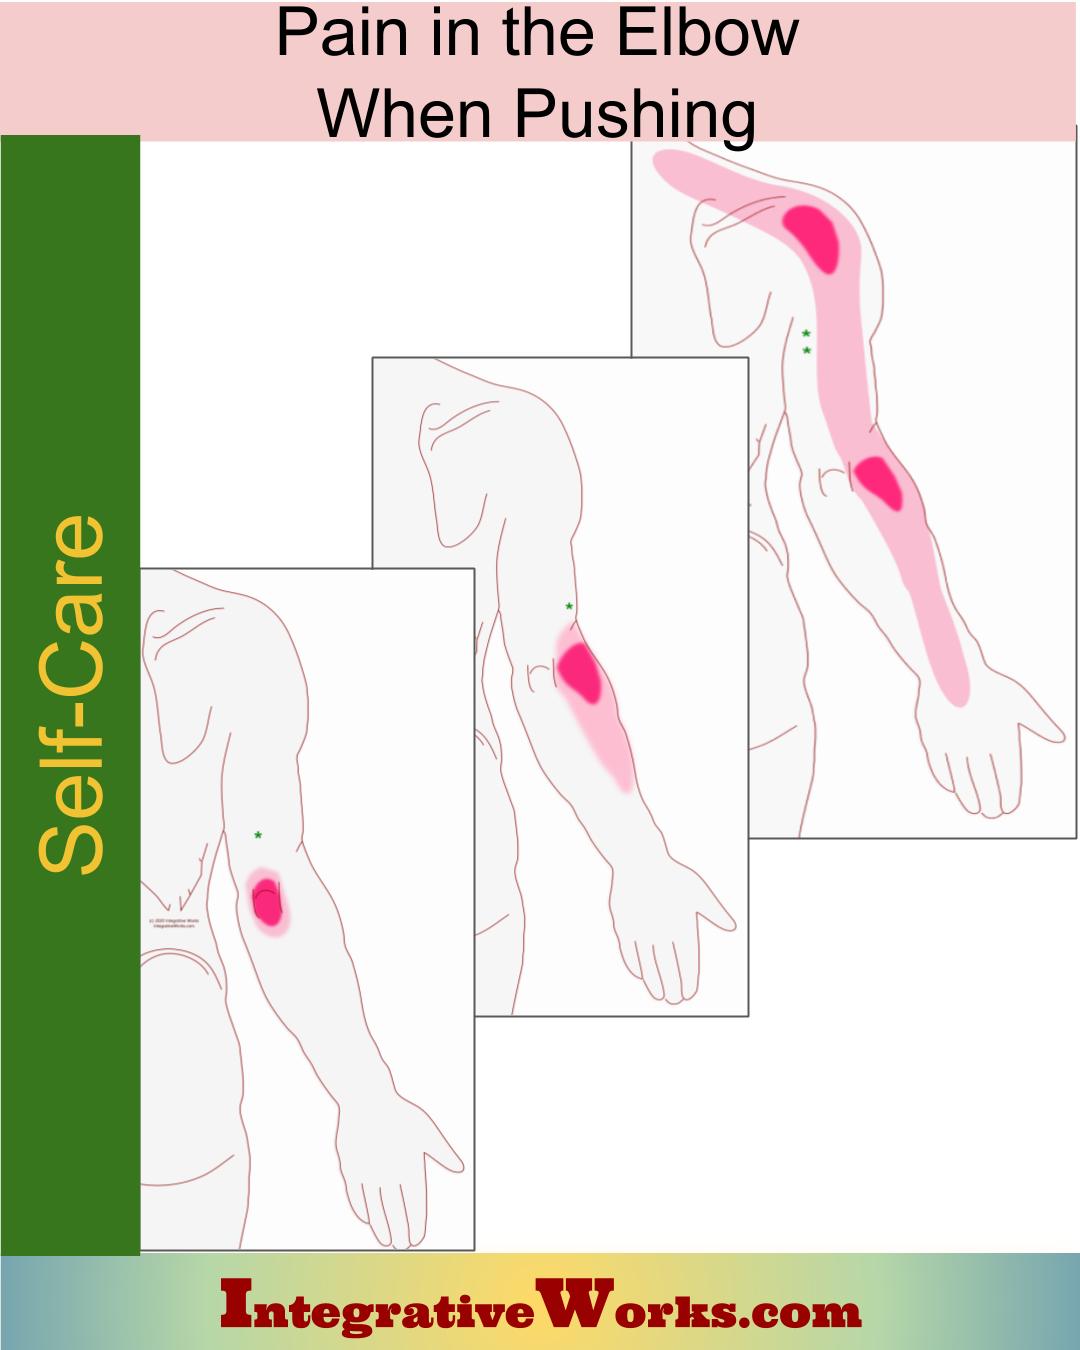 Self Care – Elbow Pain While Pushing